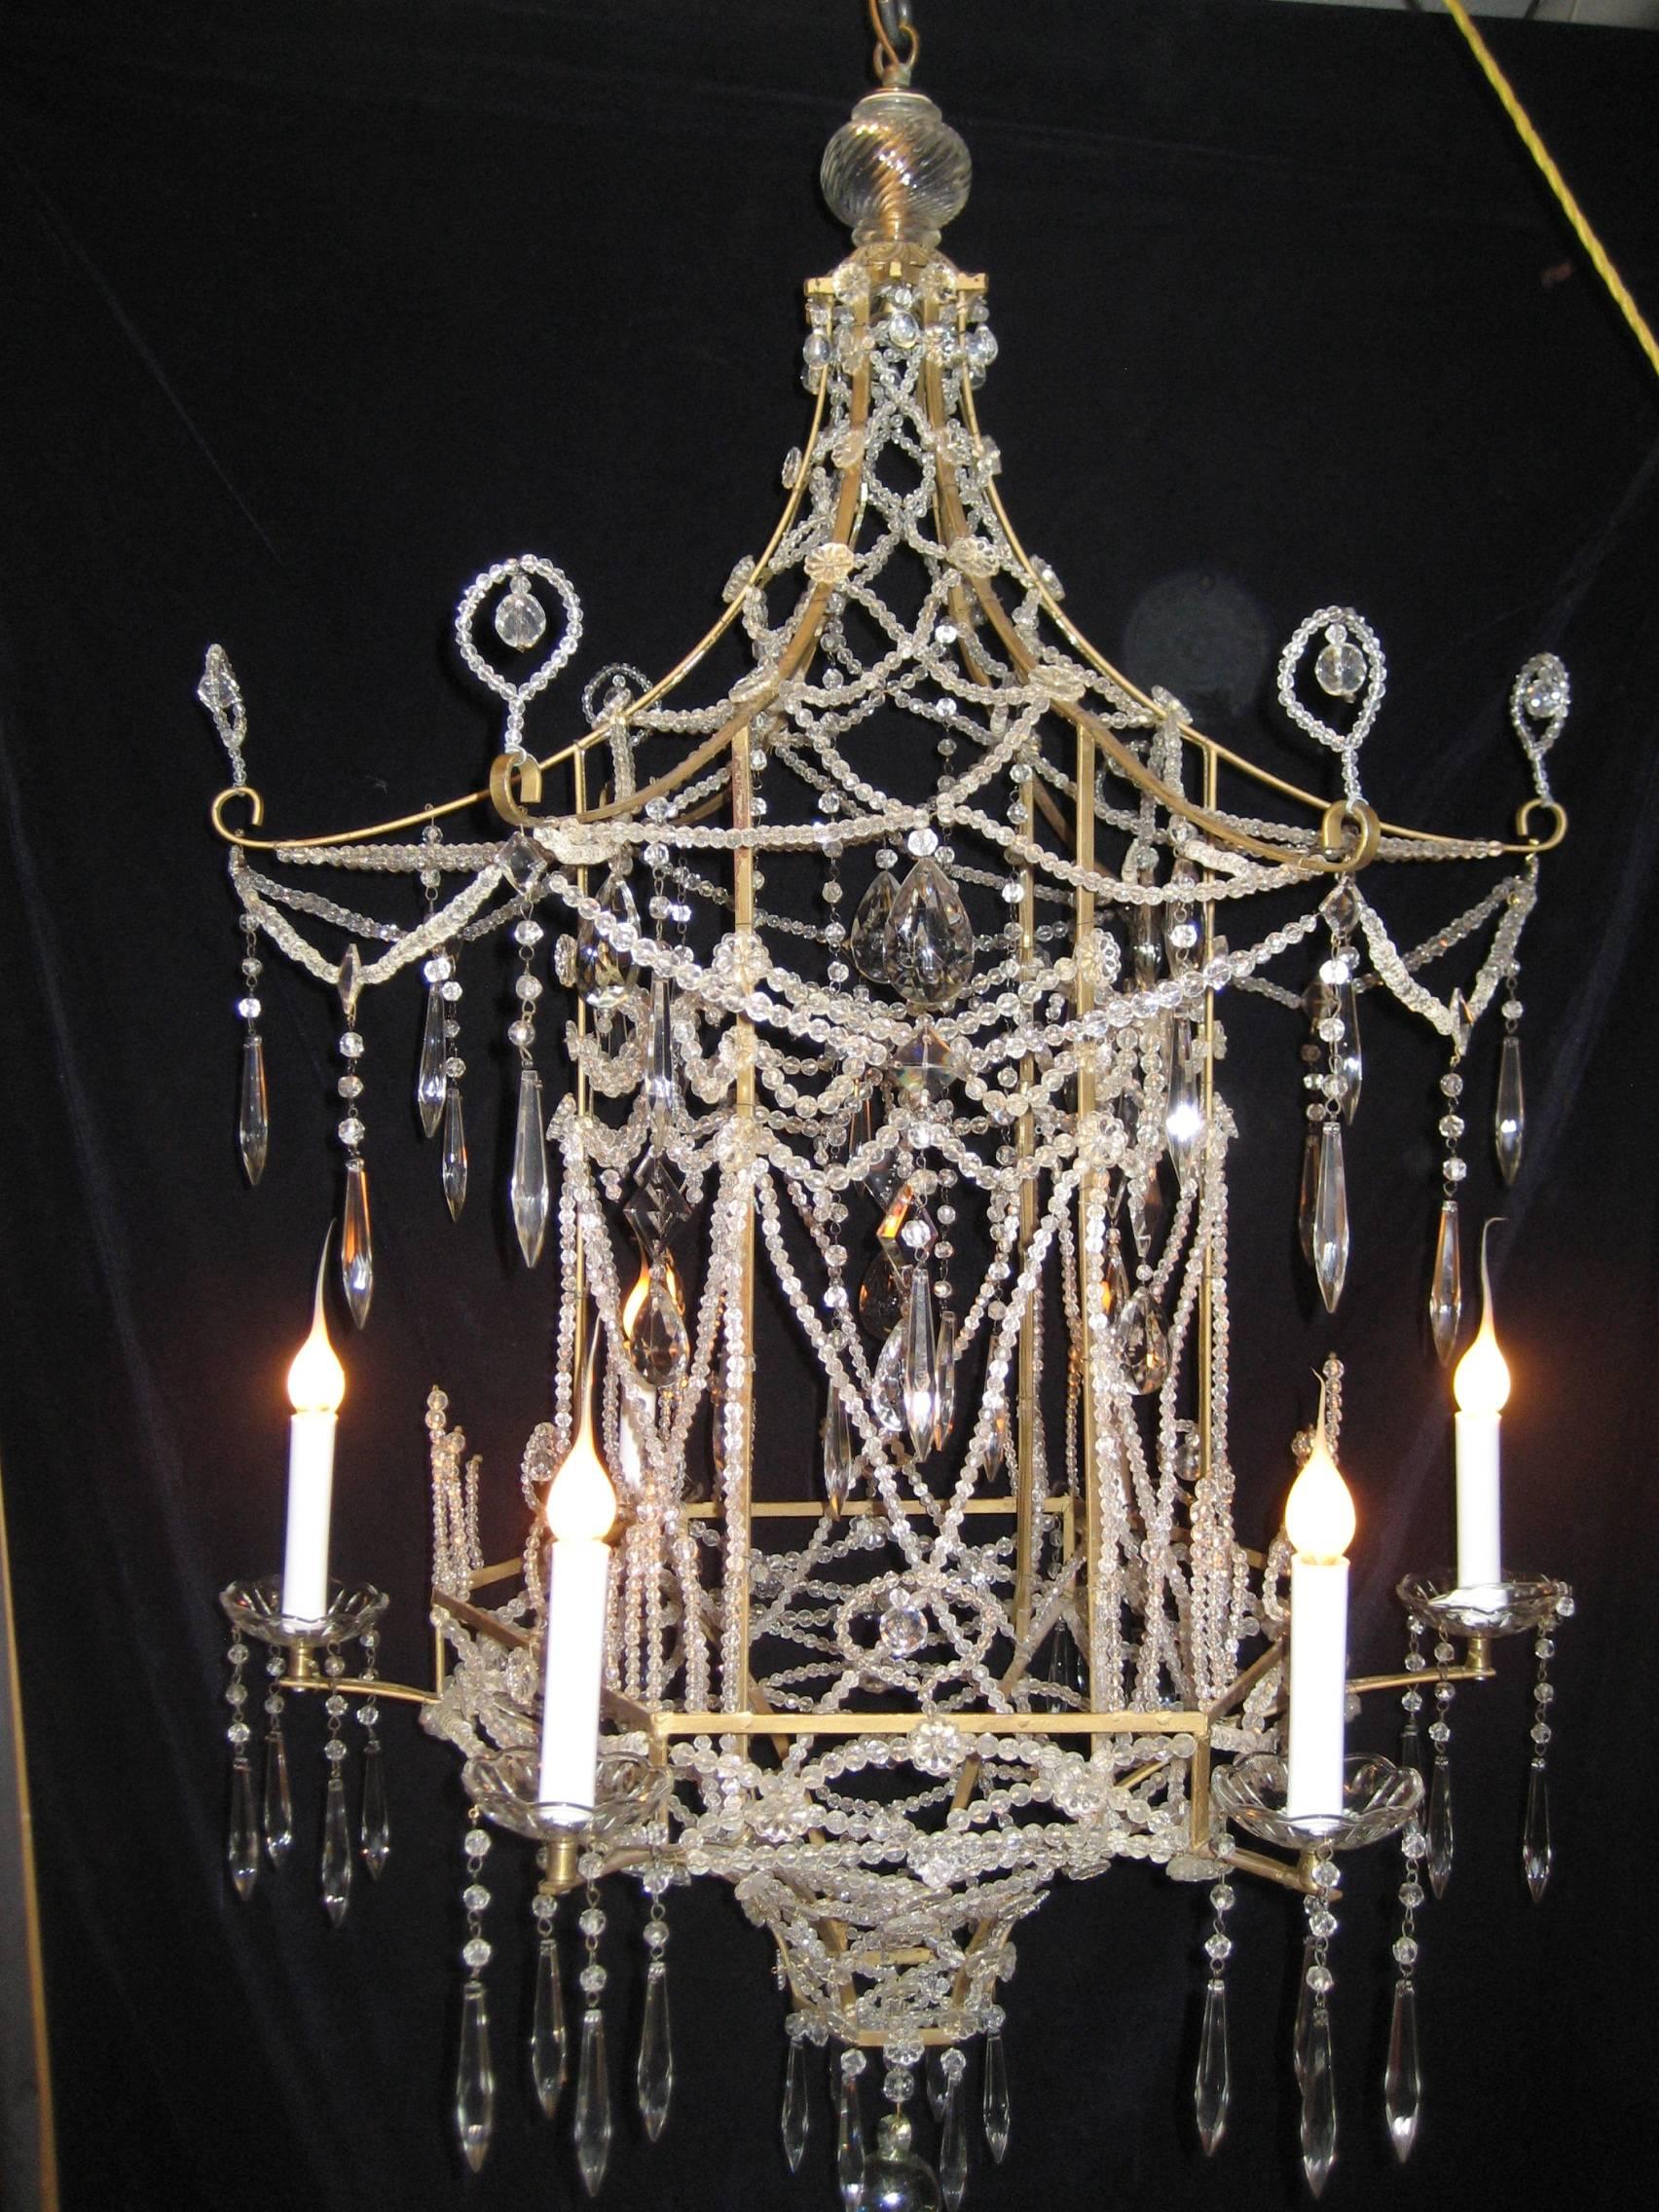 A rare Italian multi light chinoiserie style pagoda form bronze, cut crystal and beaded crystal chandelier of great detail embellished with crystal chains and prisms.